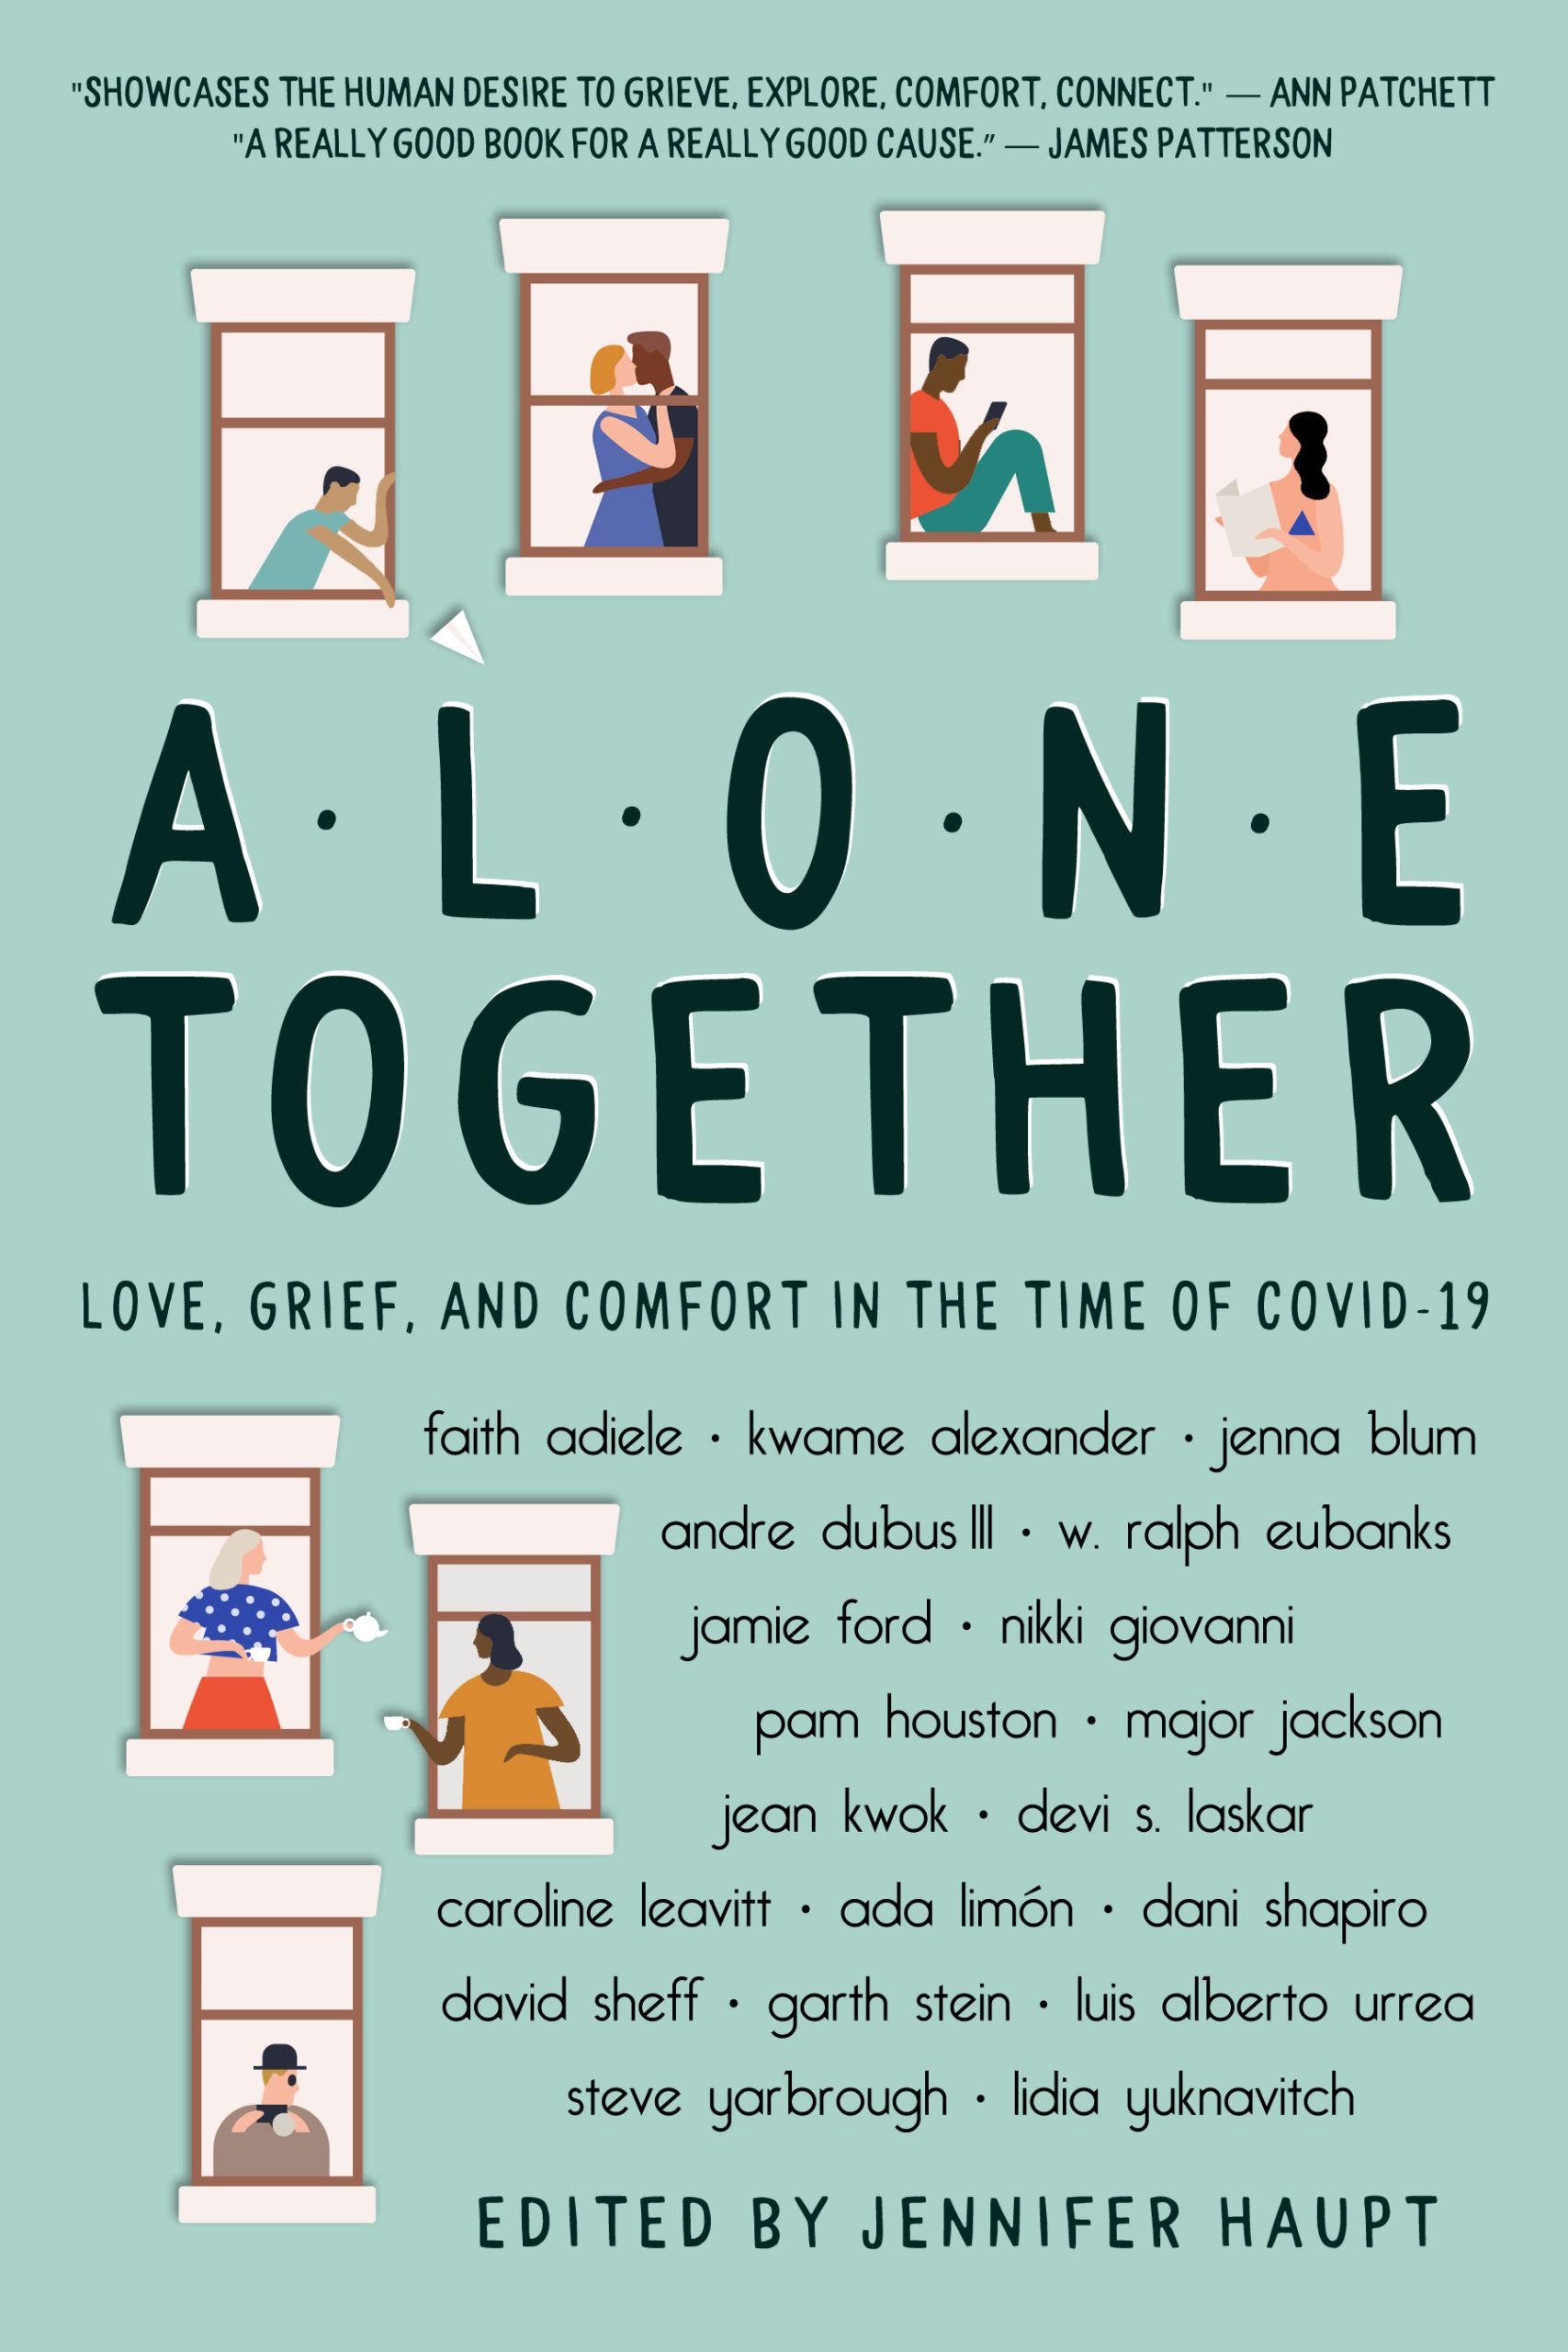 Short Story. Alone Together: Love, Grief and Comfort in the Time of COVID-19, Edited by Jennifer Haupt. Link: https://i.gr-assets.com/images/S/compressed.photo.goodreads.com/books/1592453456l/53342241.jpg